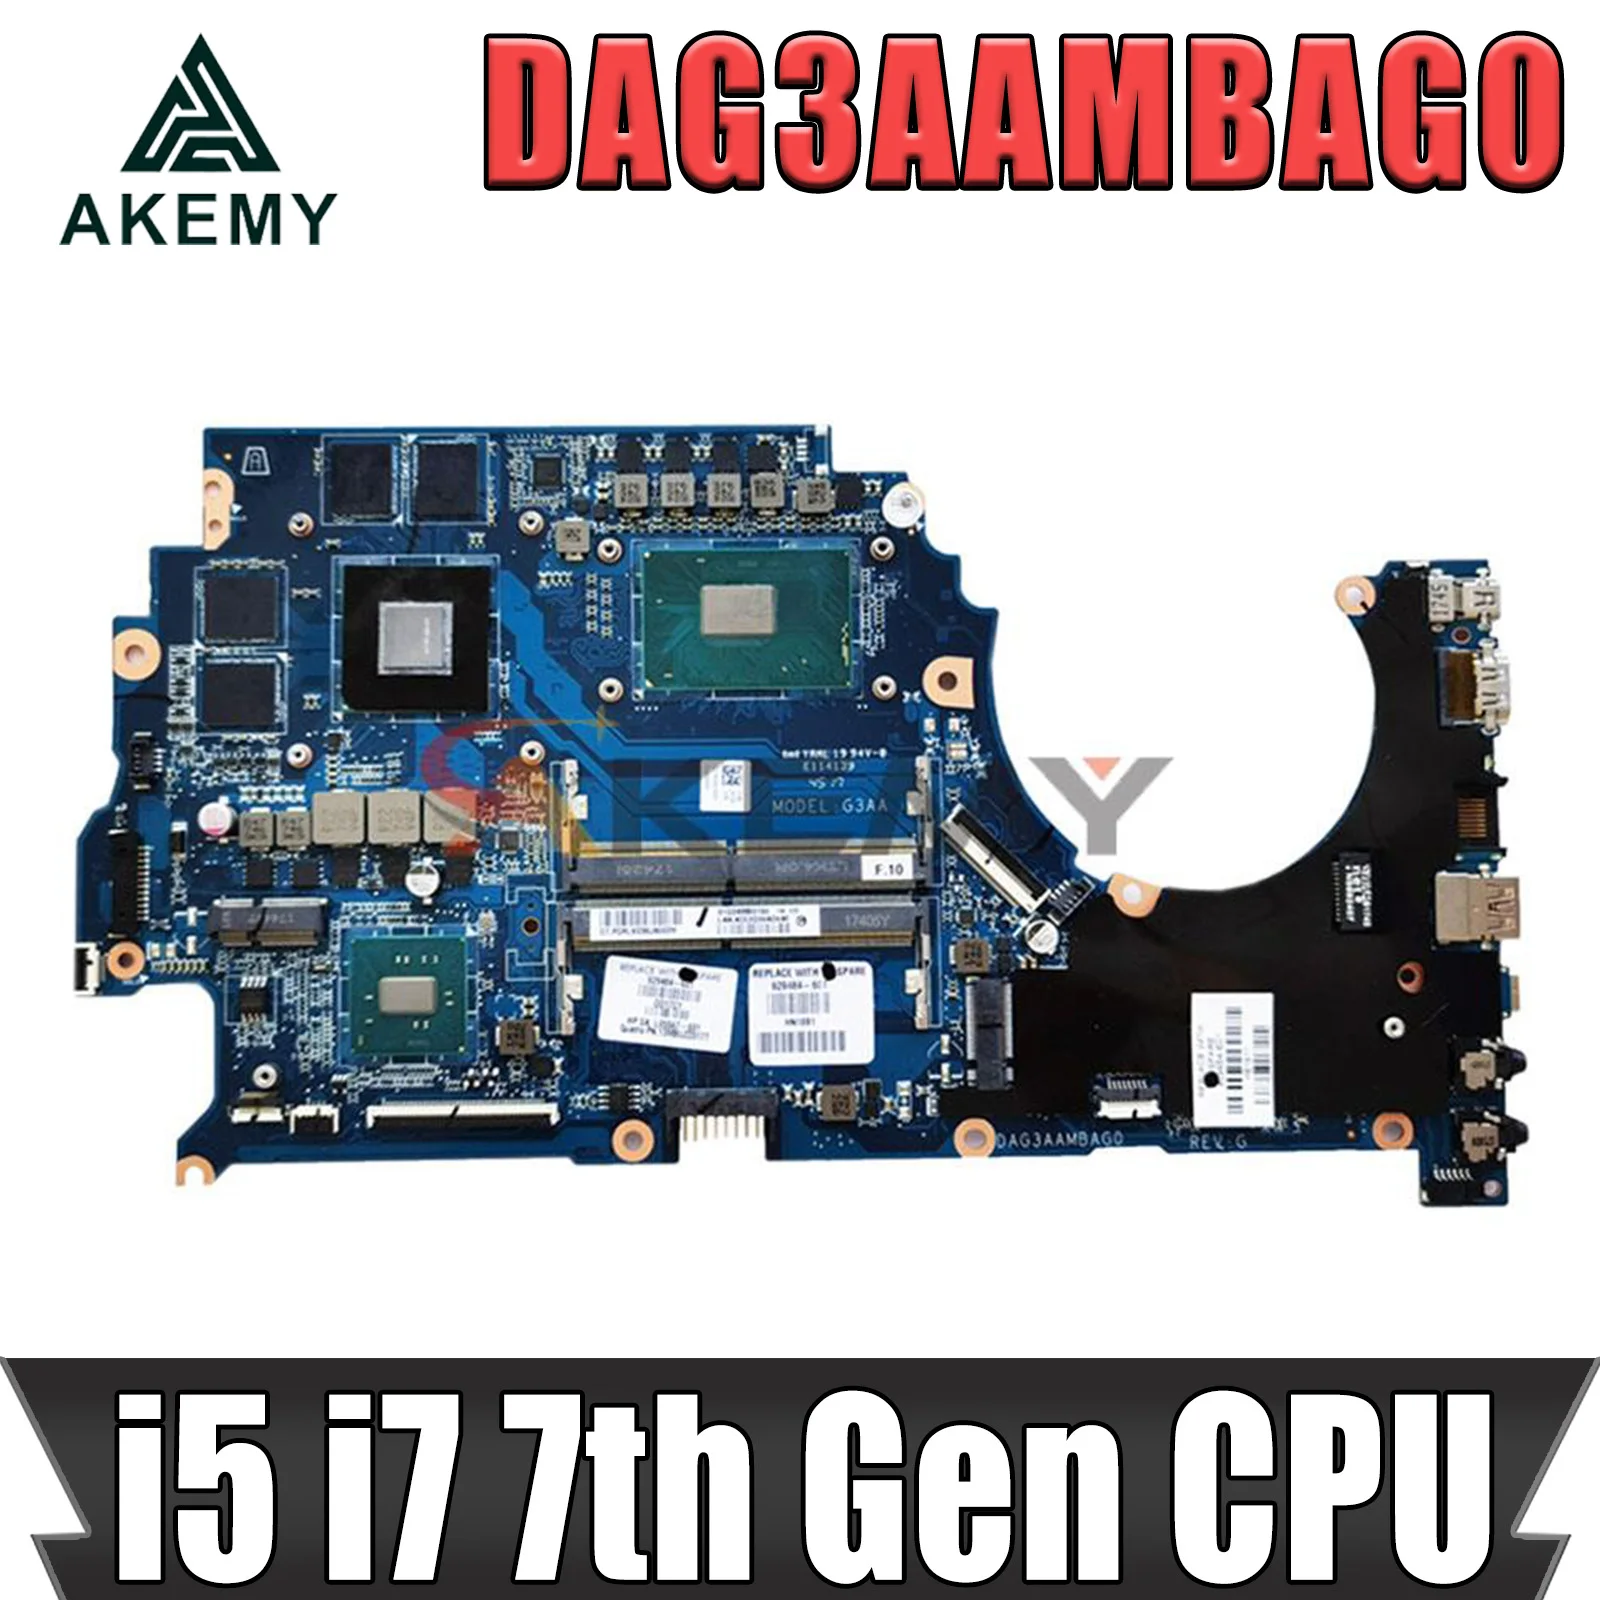 

For HP OMEN 15-CE Laptop Motherboard mainboard With i5-7300HQ i7-7700HQ CPU GTX1050 4GB GPU DAG3AAMBAG0 motherboard